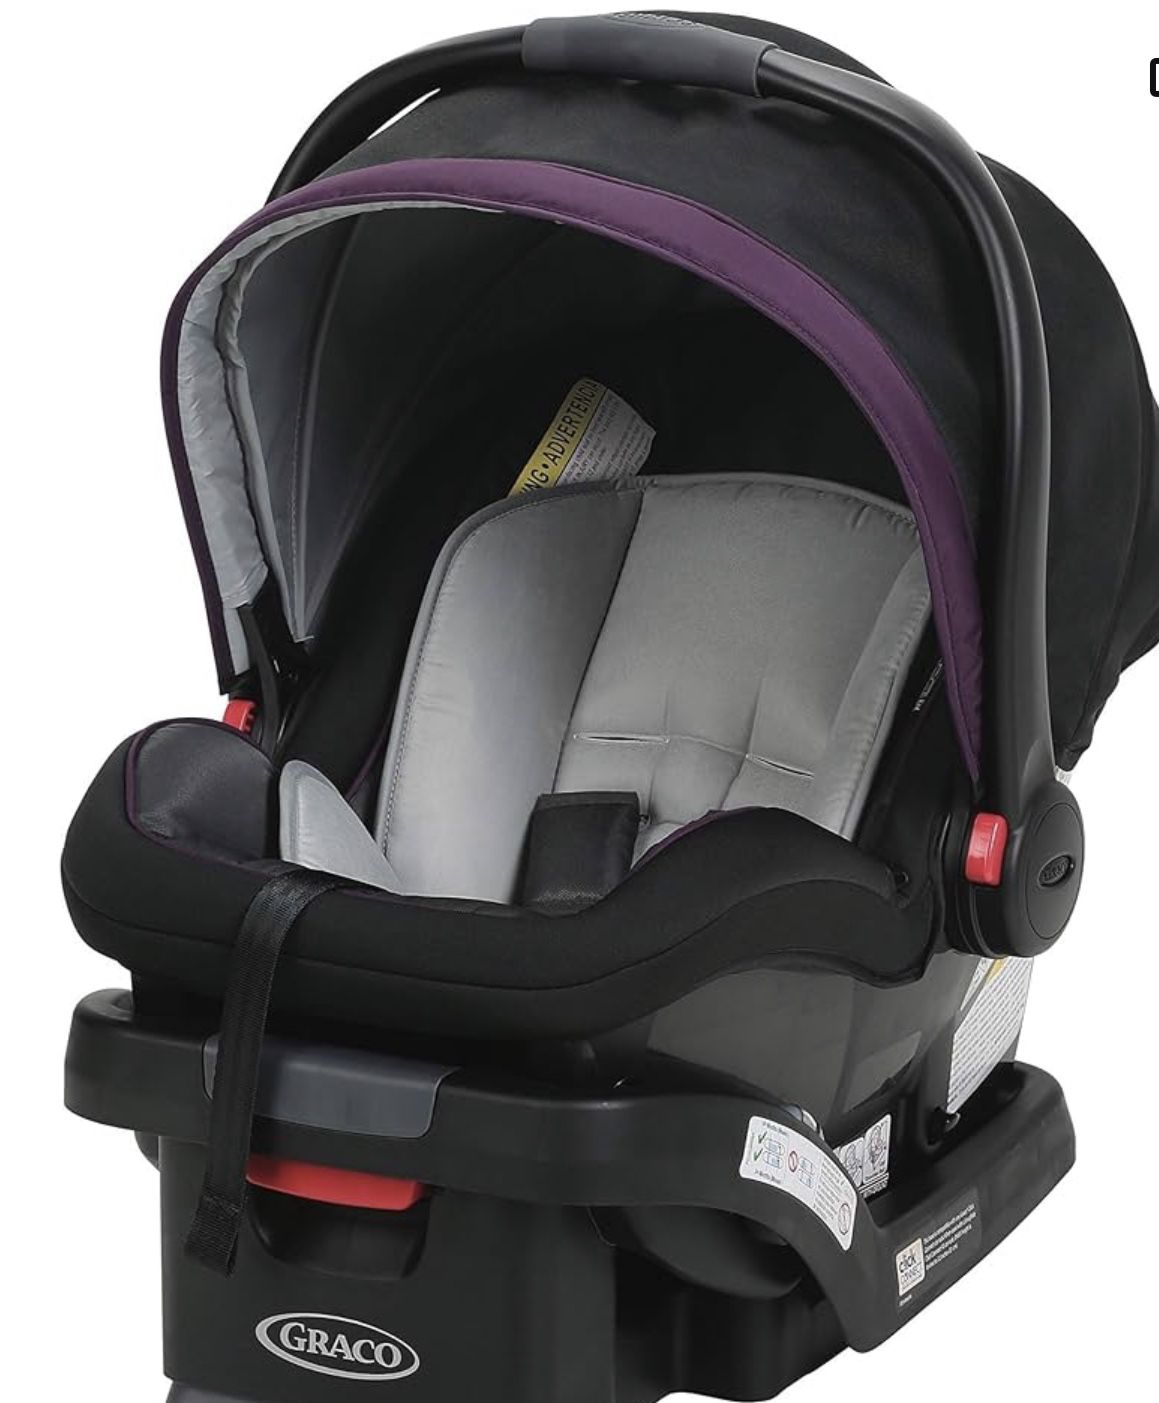 Graco Infant Car seat, High Chair, Stroller For Sale - Buy All 3, Take Baby Bath Tub for FREE! 